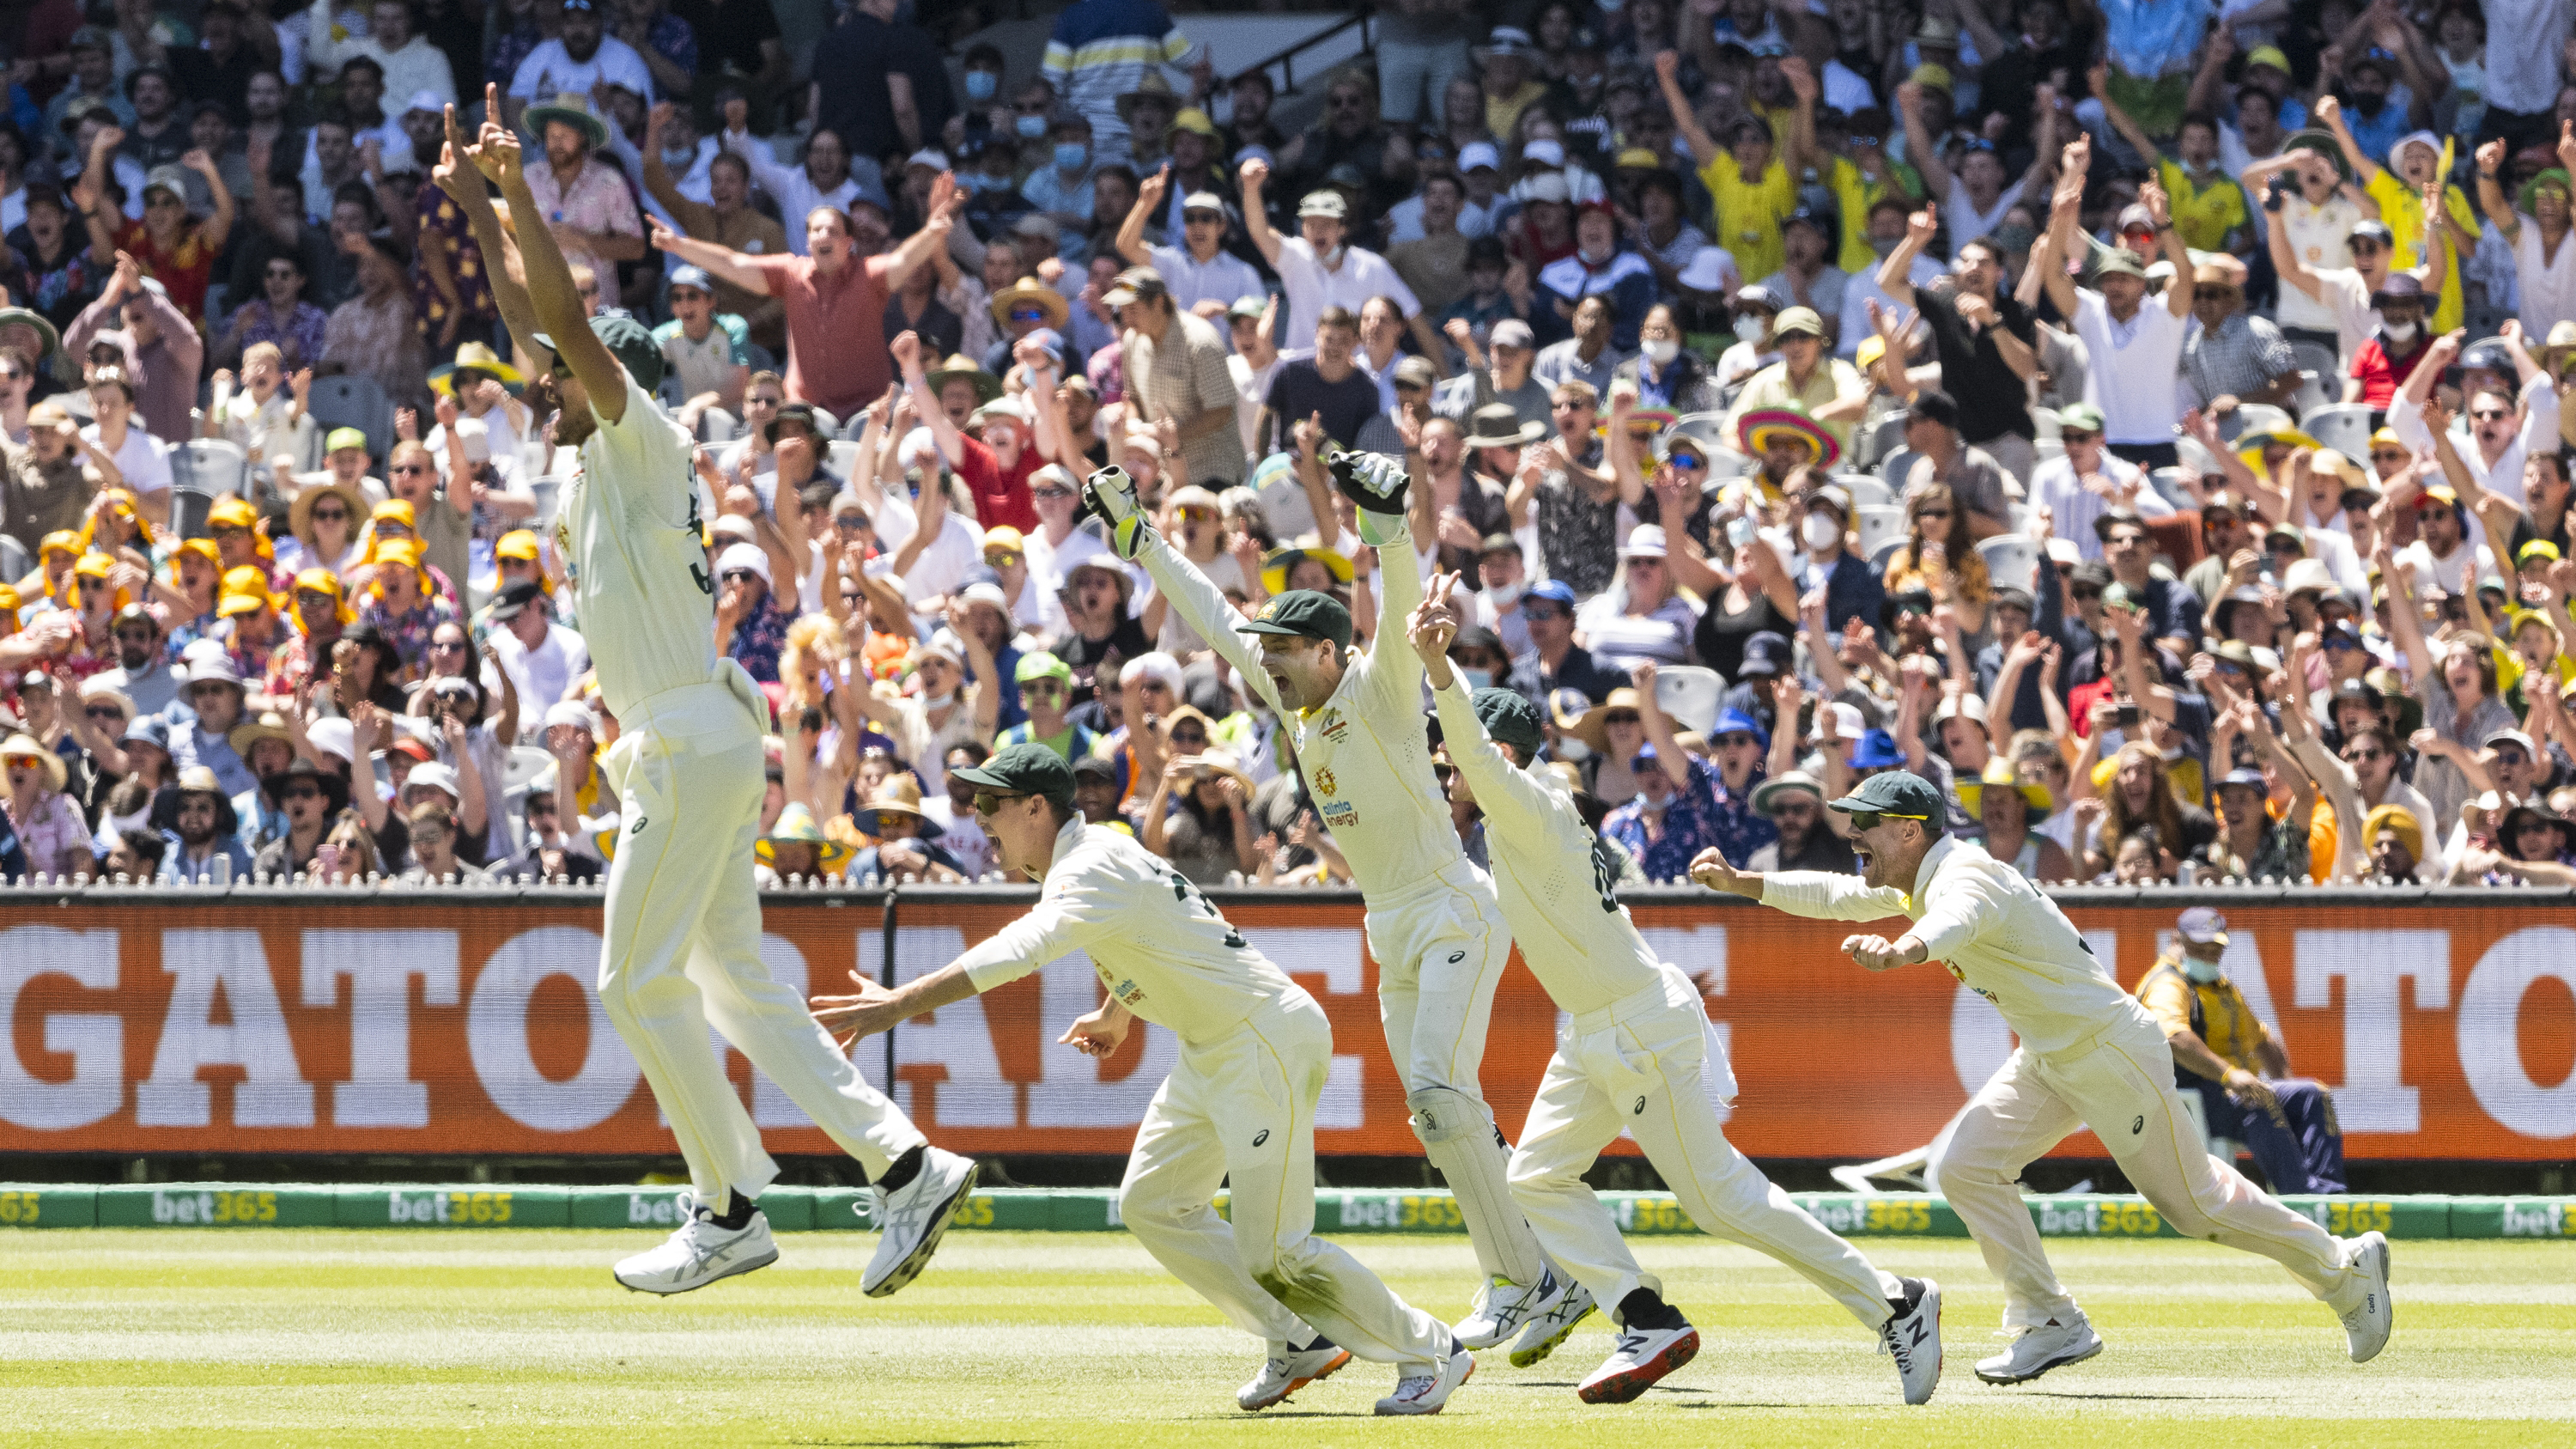 The Australian team celebrates after winning the match and retaining the Ashes  on day 3 of the Boxing Day test match at the MCG in Melbourne.